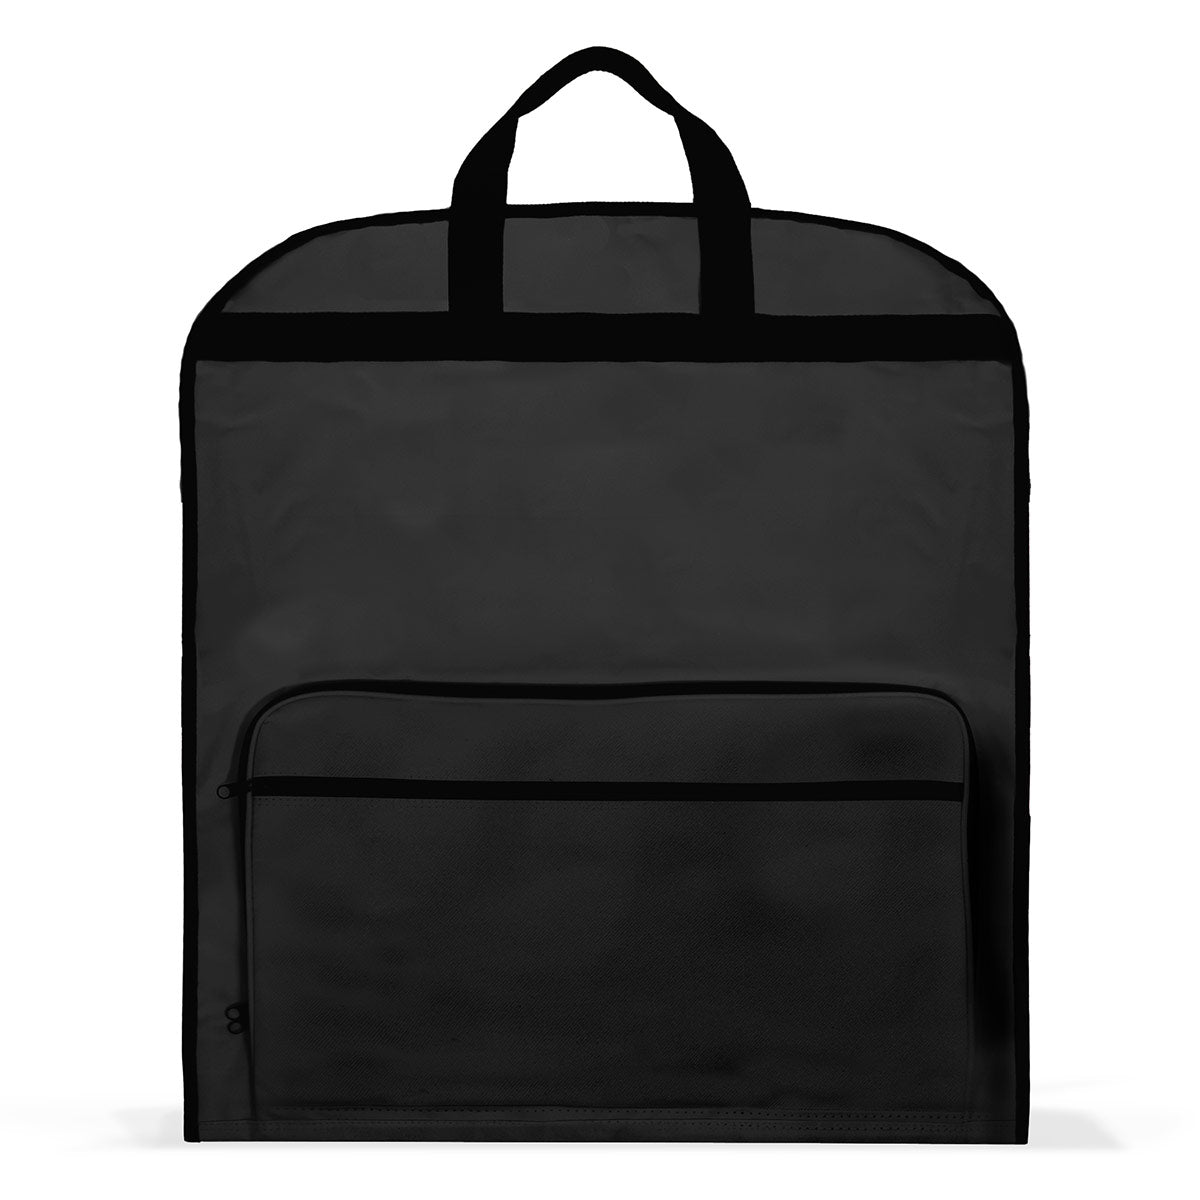 Dalix 60" Garment Bag Cover for Suits Gowns Dresses Business Foldable